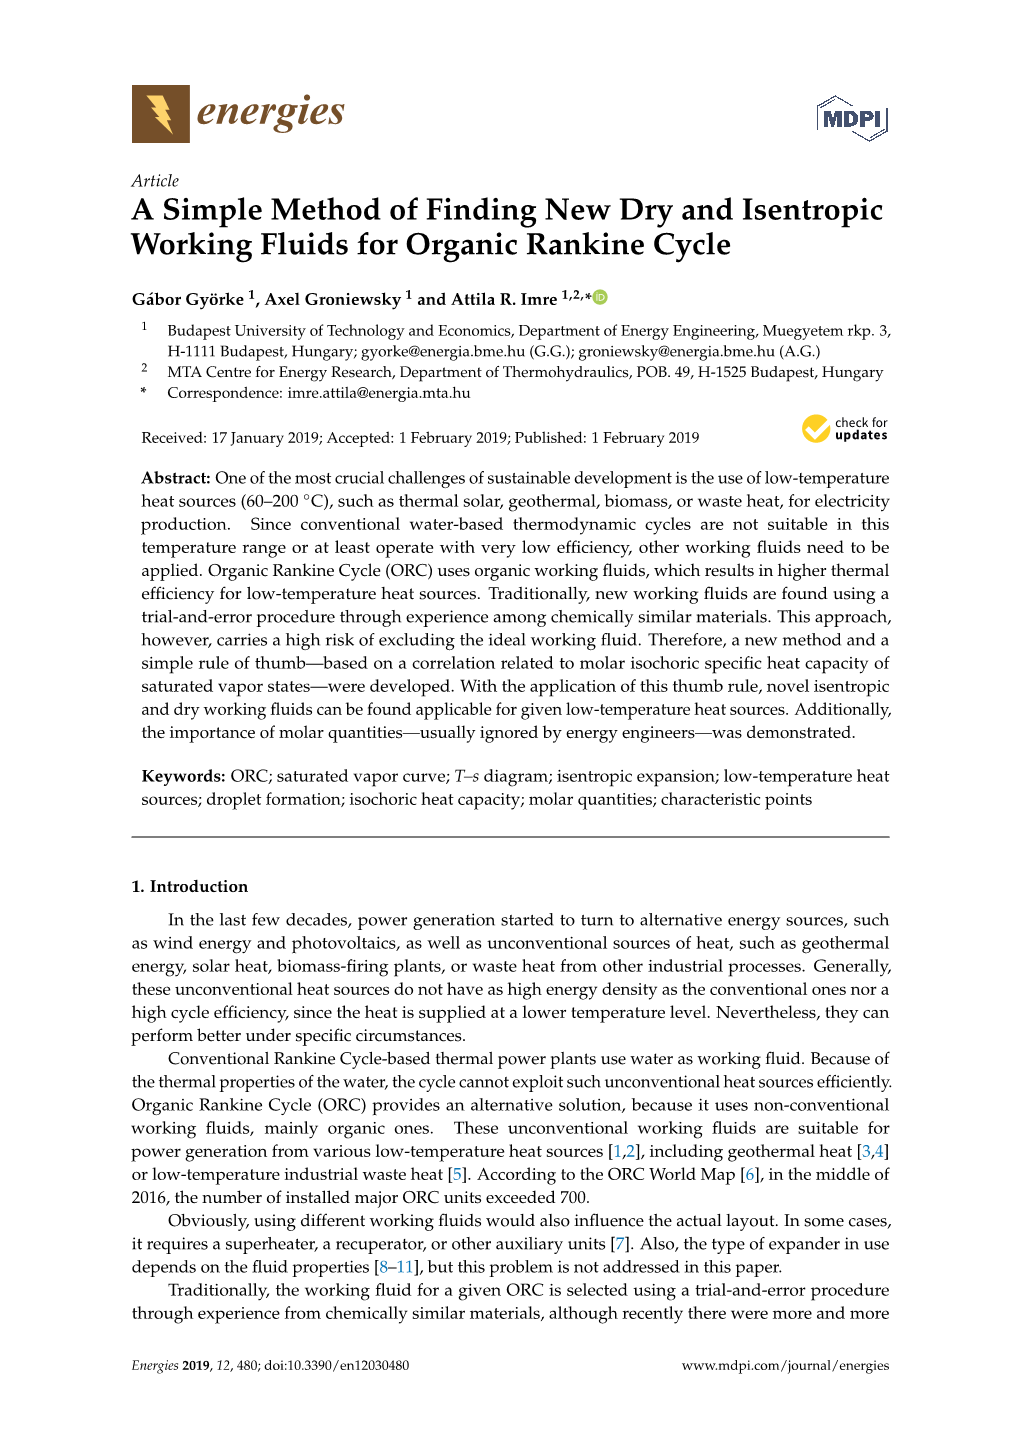 A Simple Method of Finding New Dry and Isentropic Working Fluids for Organic Rankine Cycle